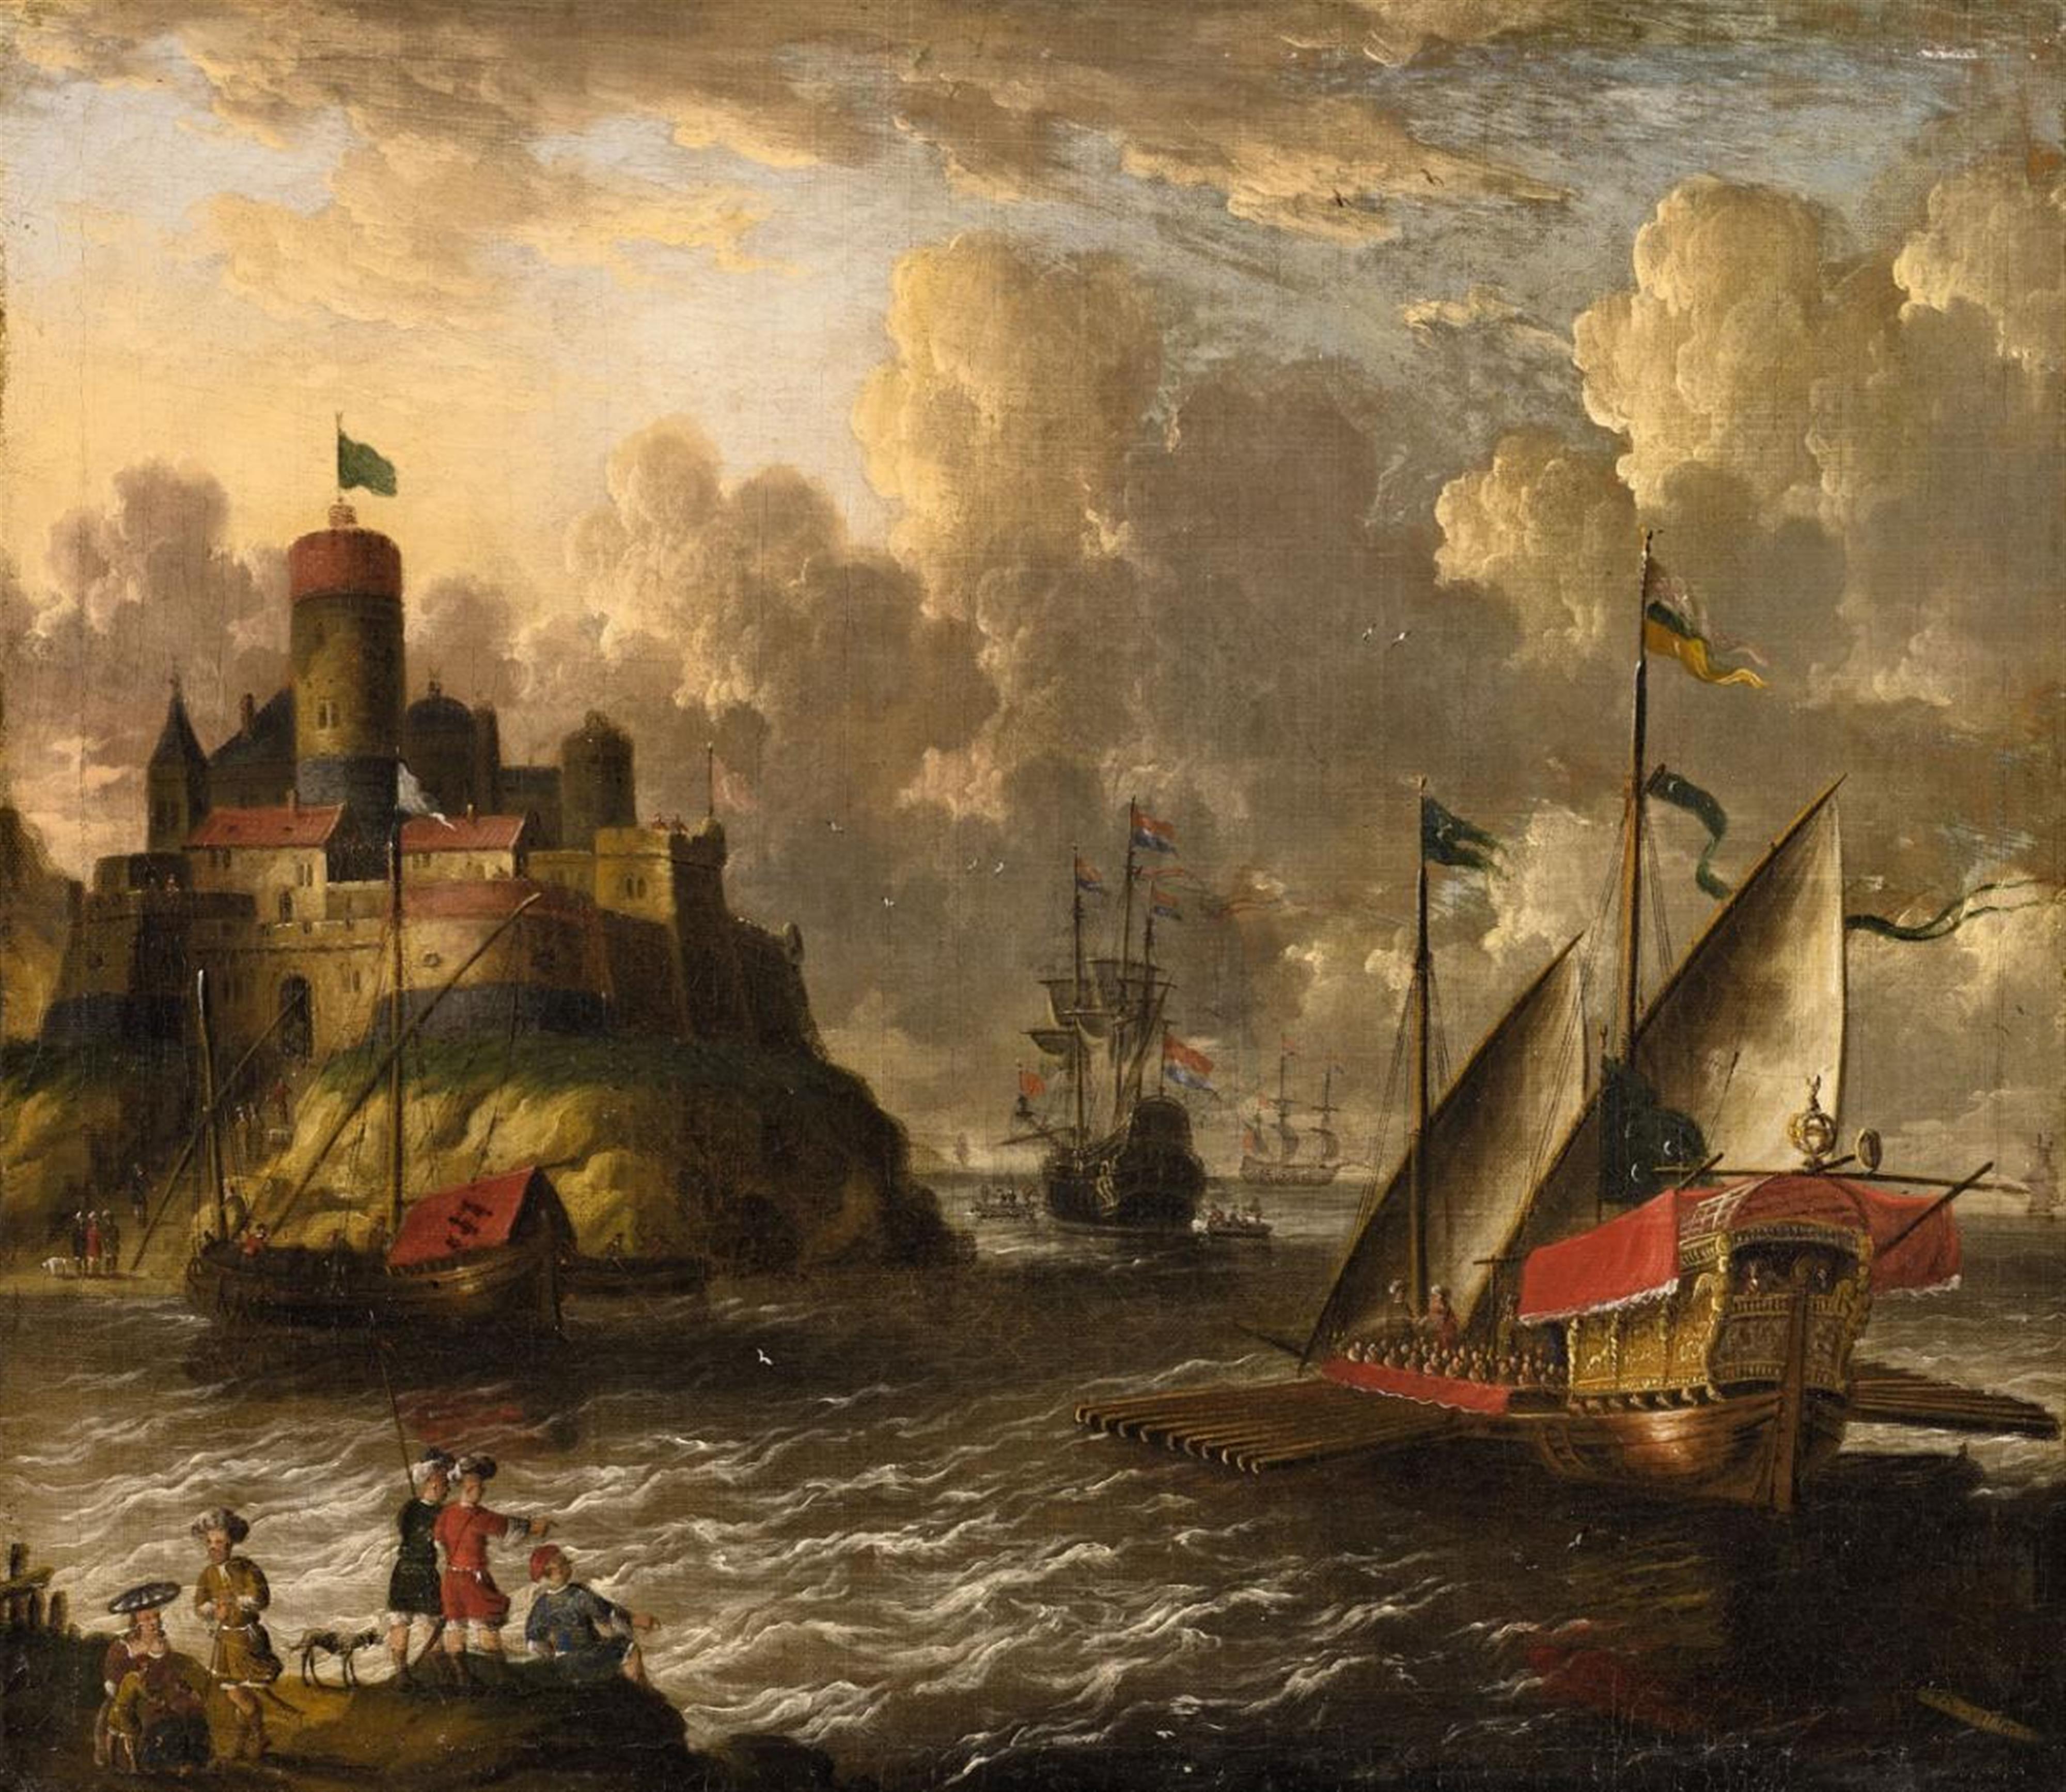 Pieter van den Velde - A VIEW OF A HARBOUR WITH A GALLEY - image-1